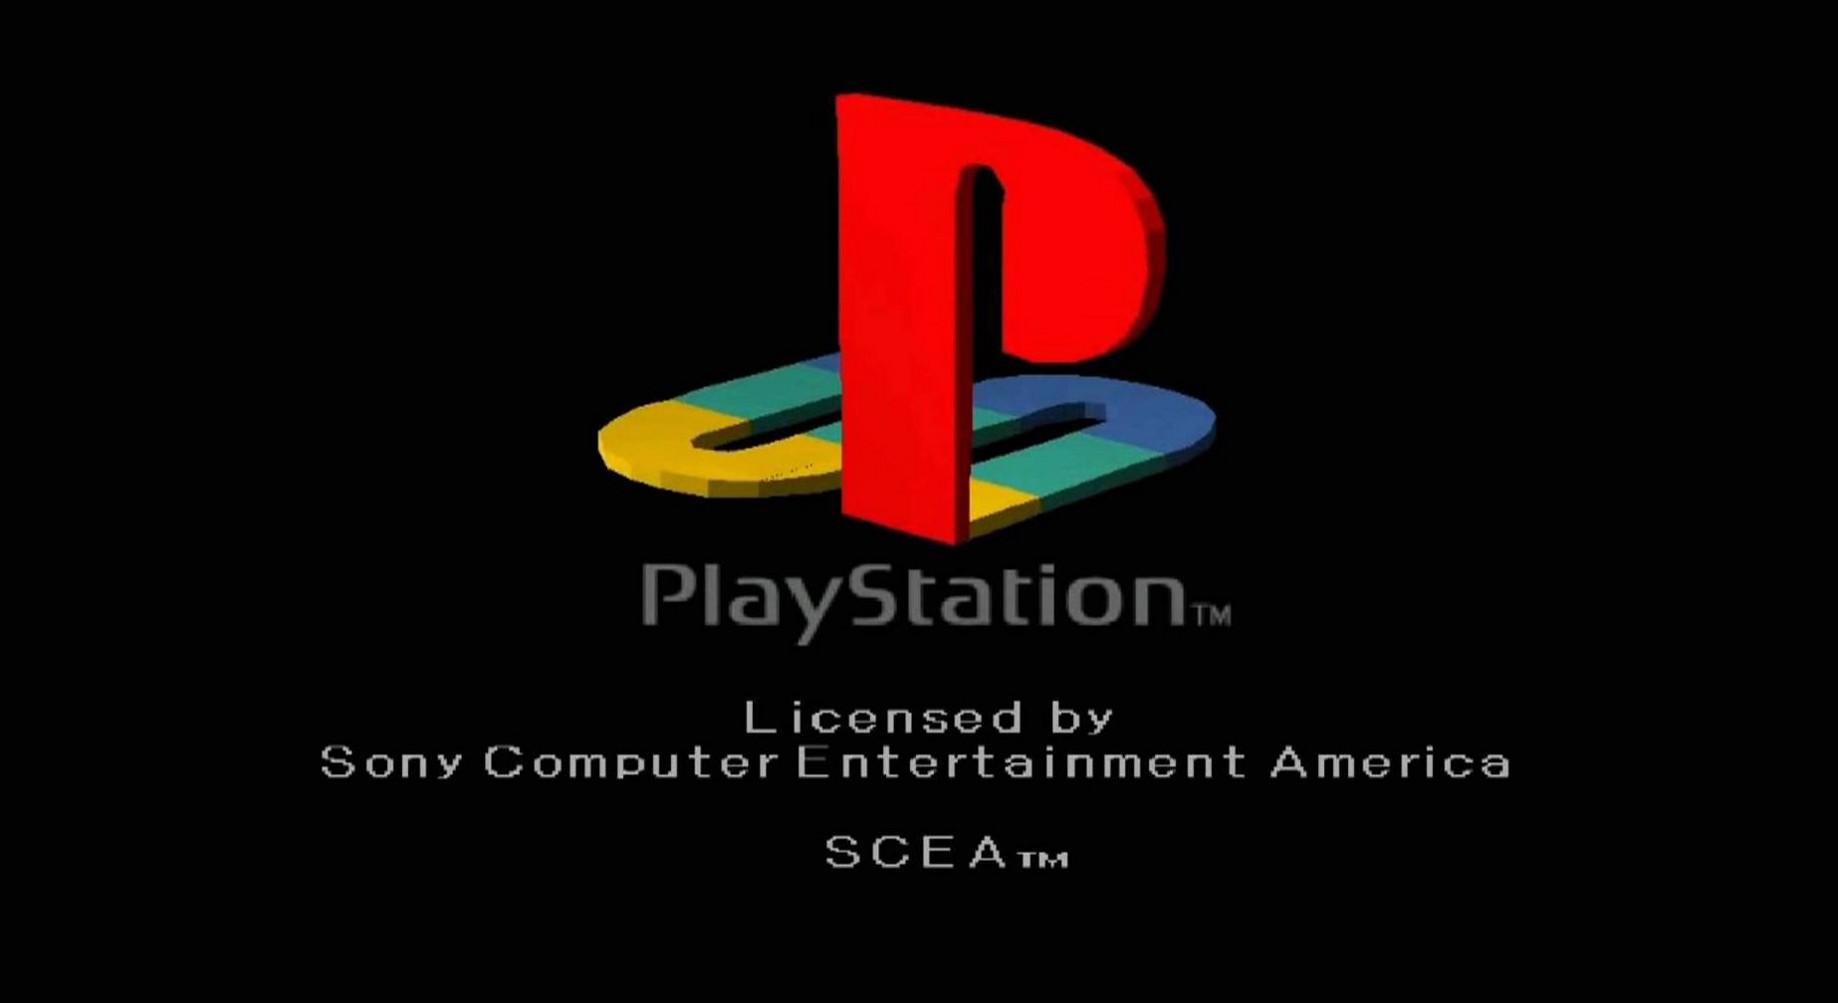 PSOne Logo - Ghosts in the Playstation: The Unsettling Sounds of “Fearful Harmony